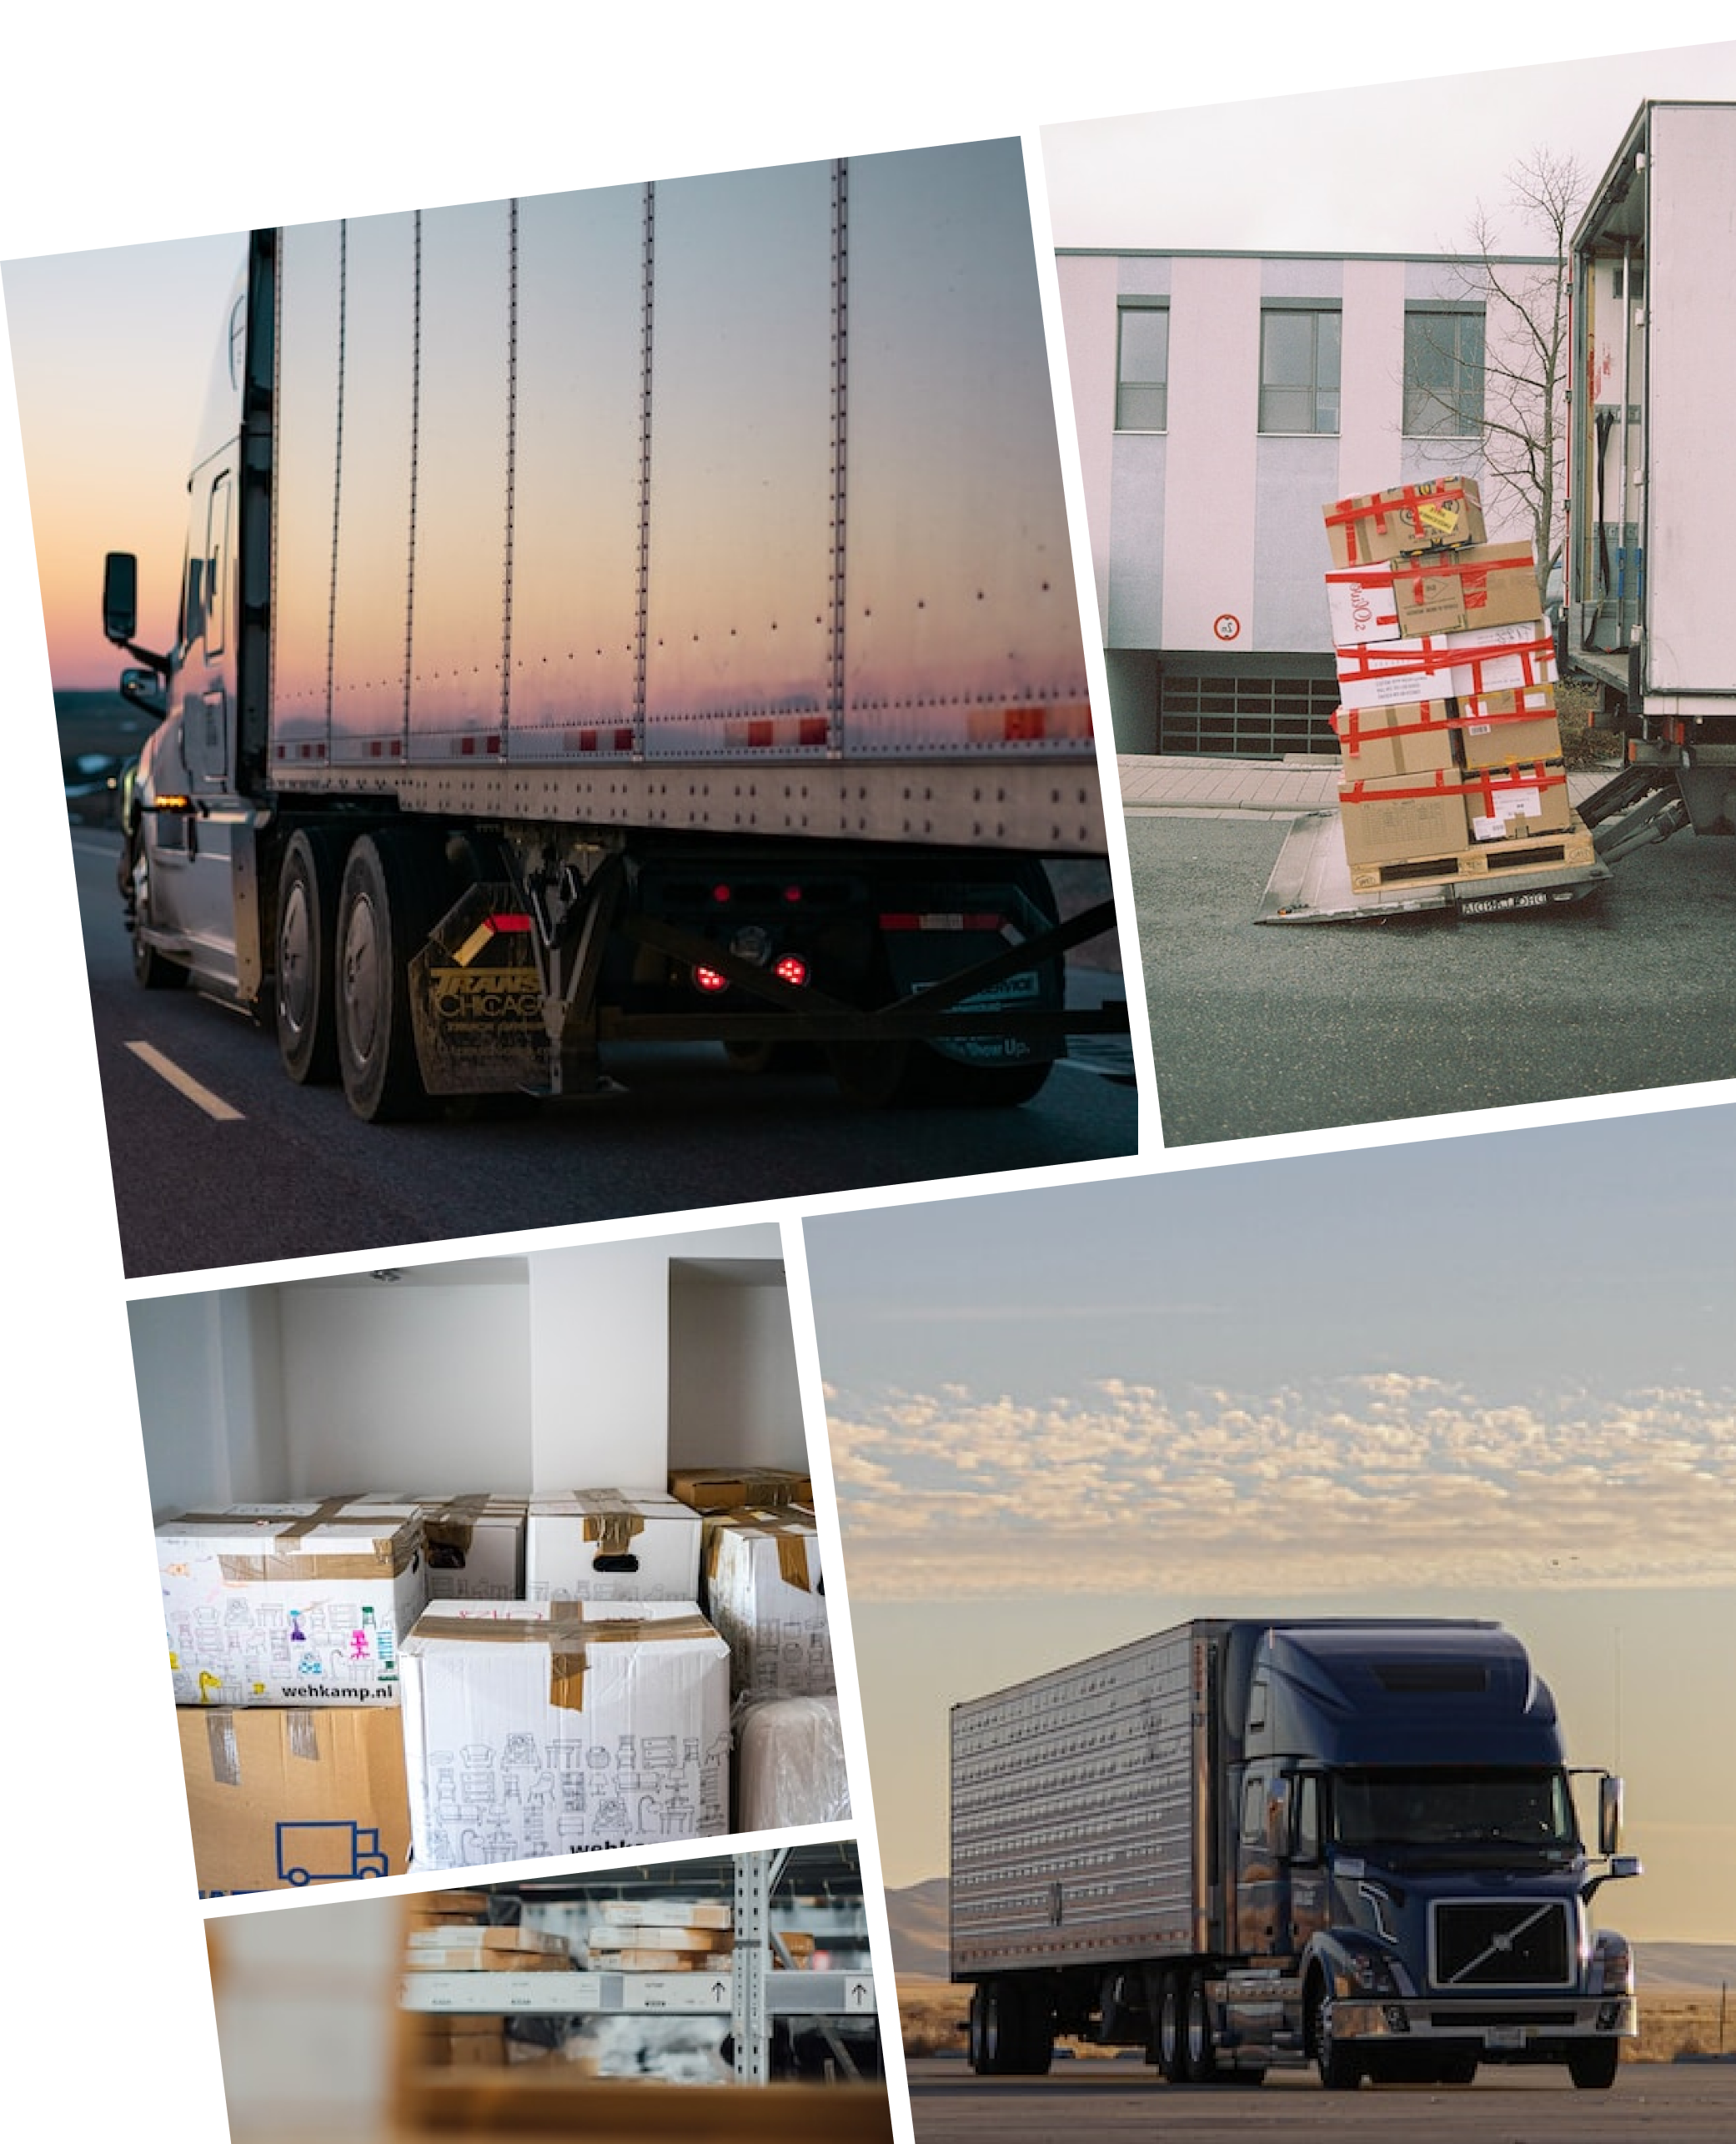 Collage of logistics and freight transportation scenes involving trucks and packages.